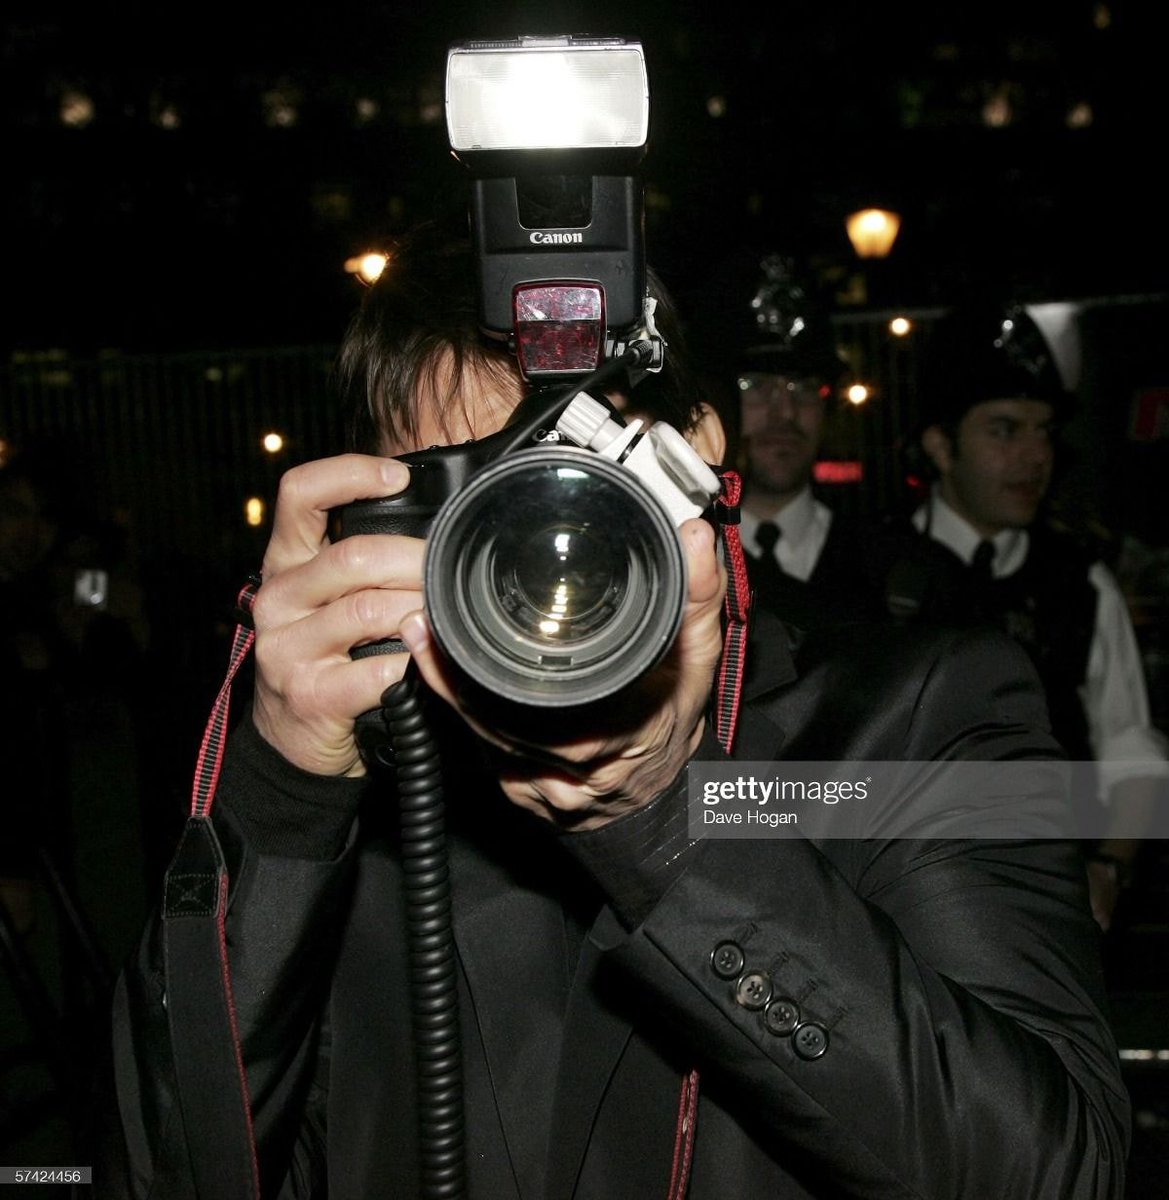 Tom Cruise borrows a camera from a photographer to photograph the press at the UK Premiere of MissionImpossible3